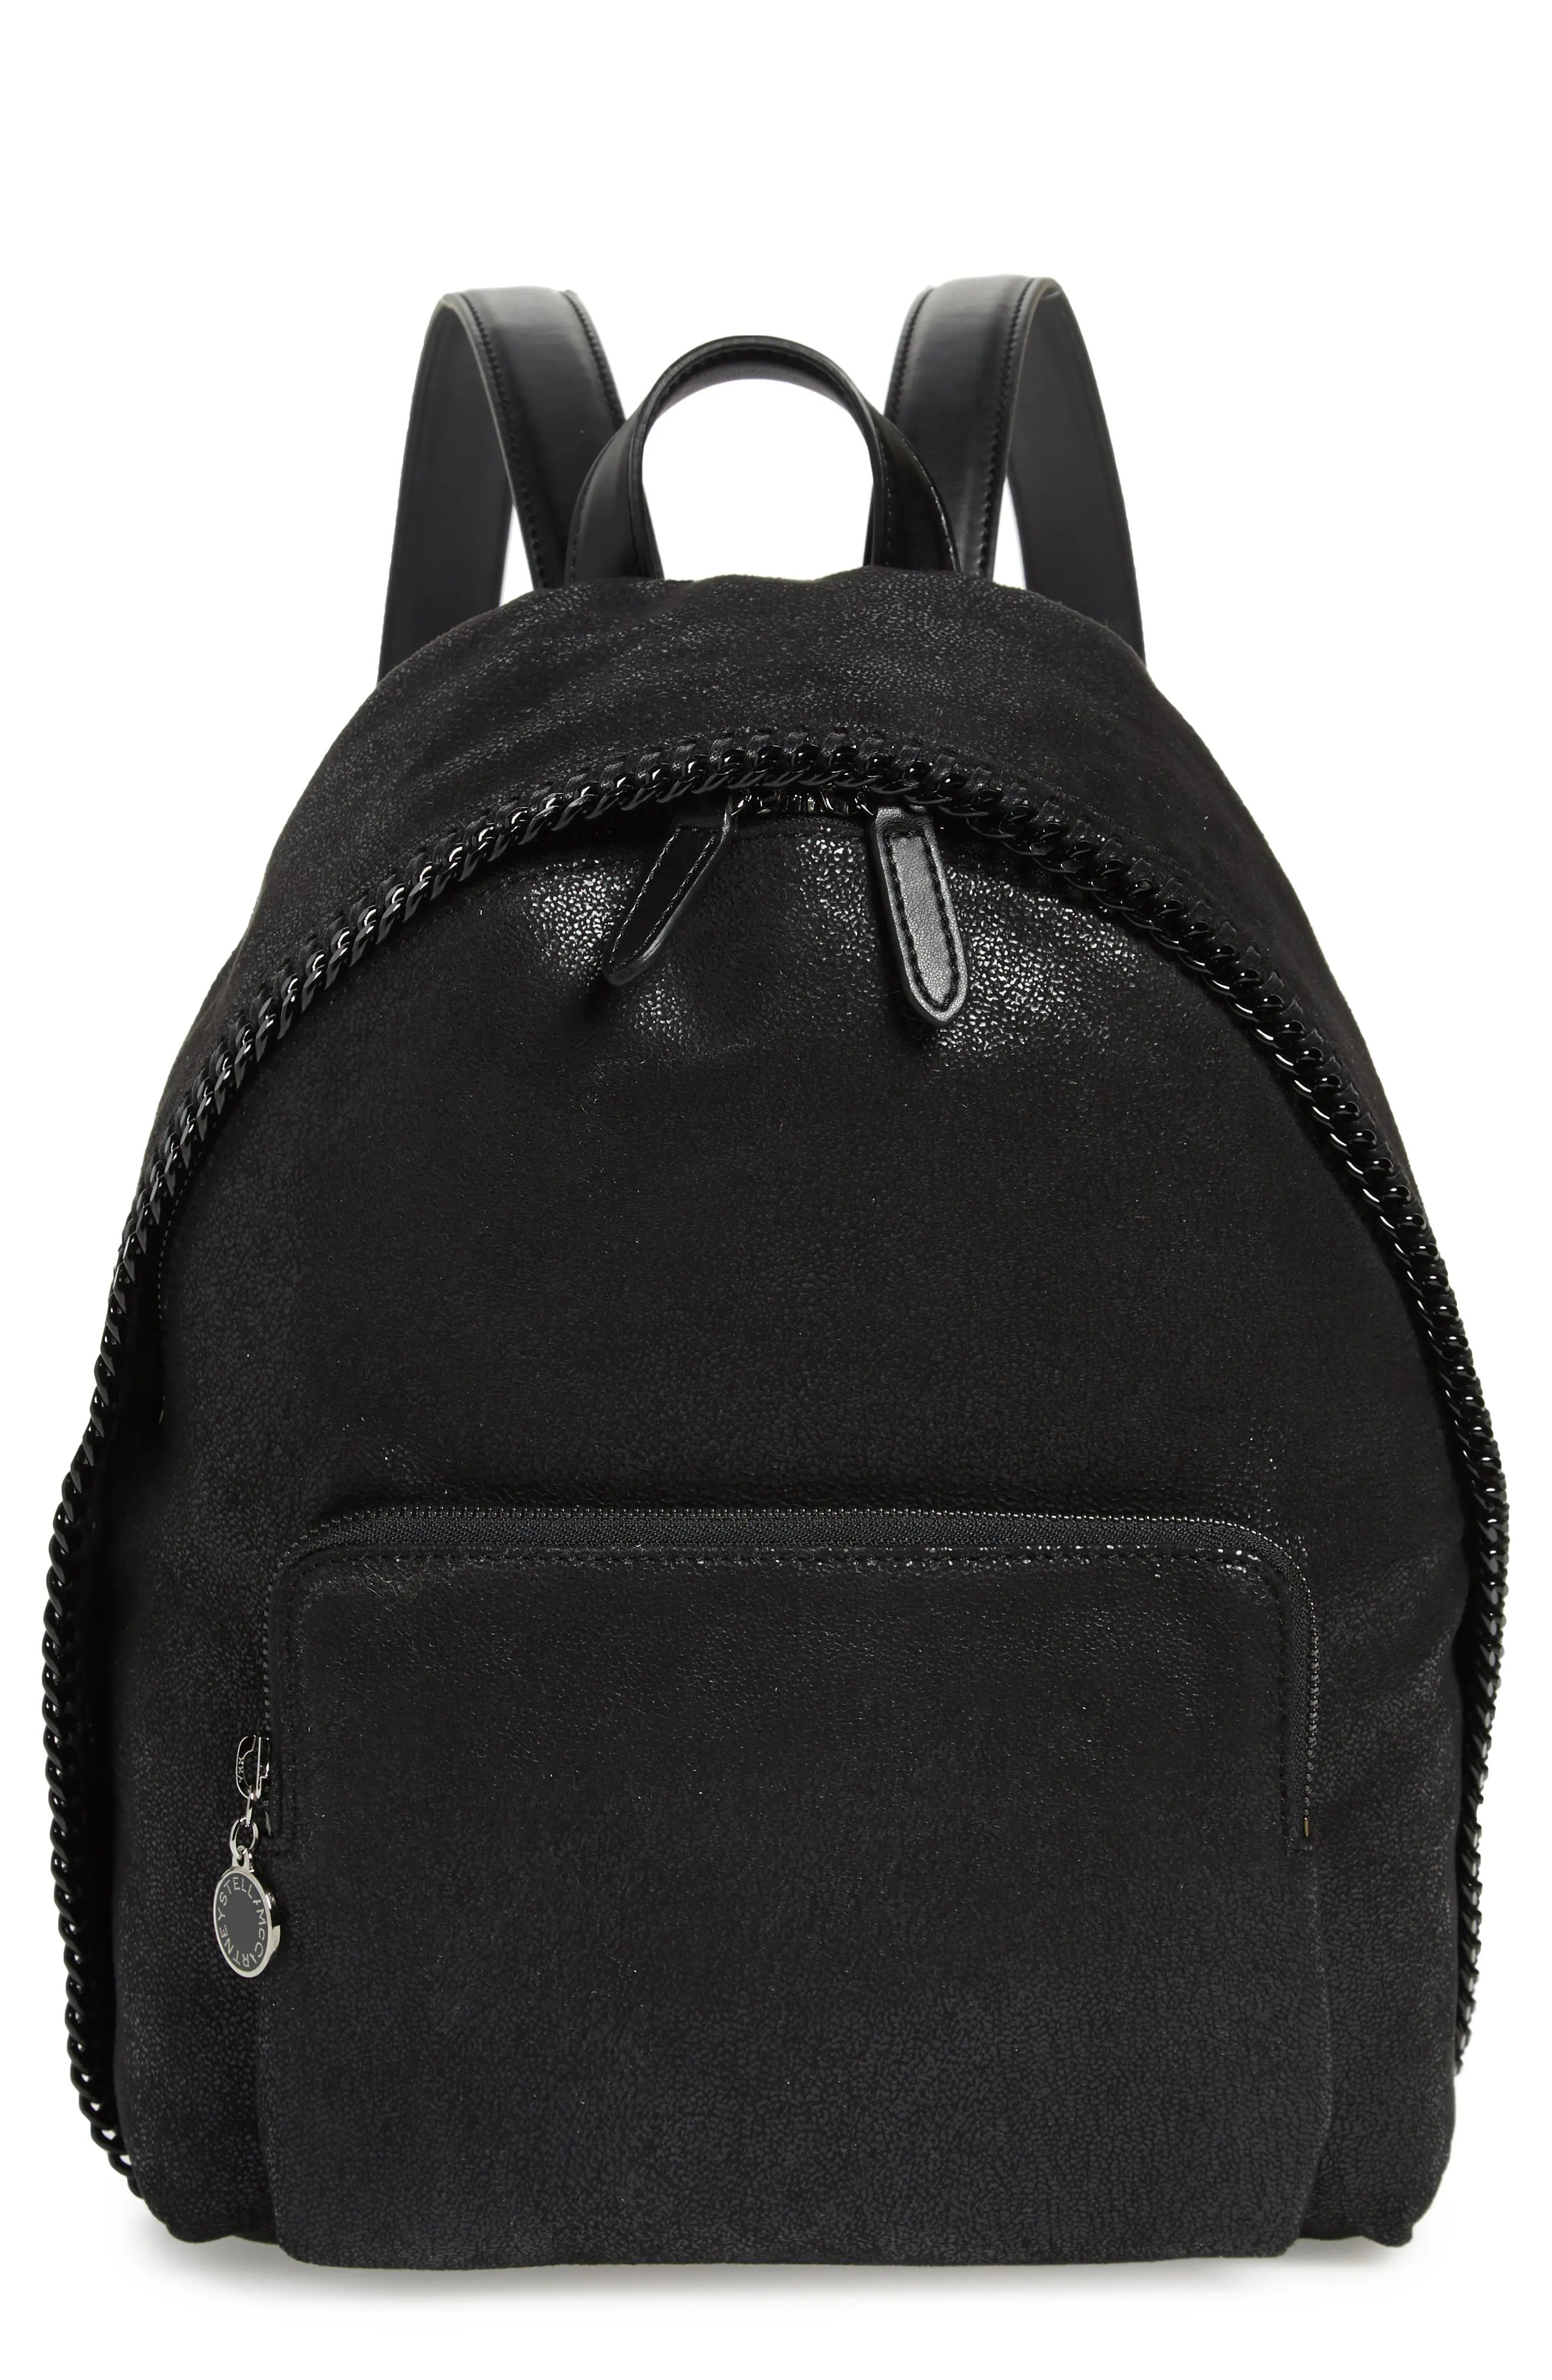 Stella Mccartney Small Falabella Faux Leather Backpack - Black | Nordstrom